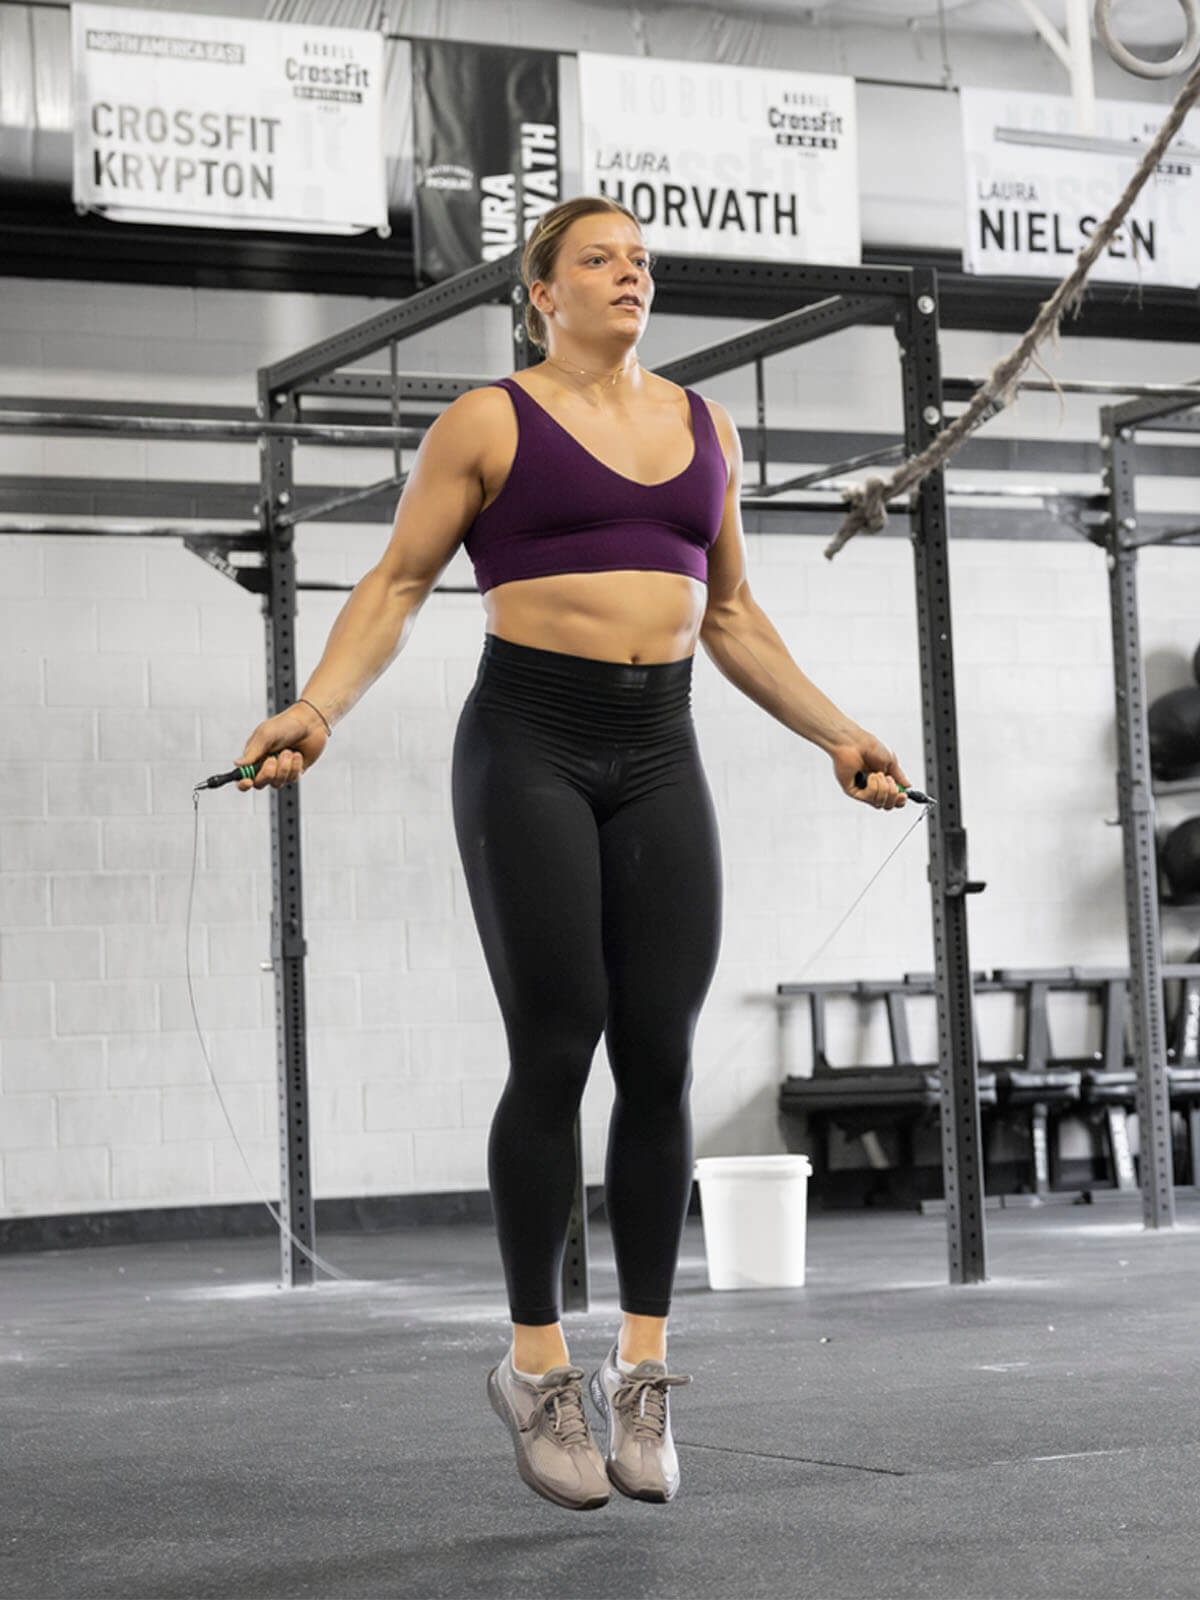 Rx_Smart_Gear_EVO_G2_Speed_Rope_Athlete_Laura_Horvath